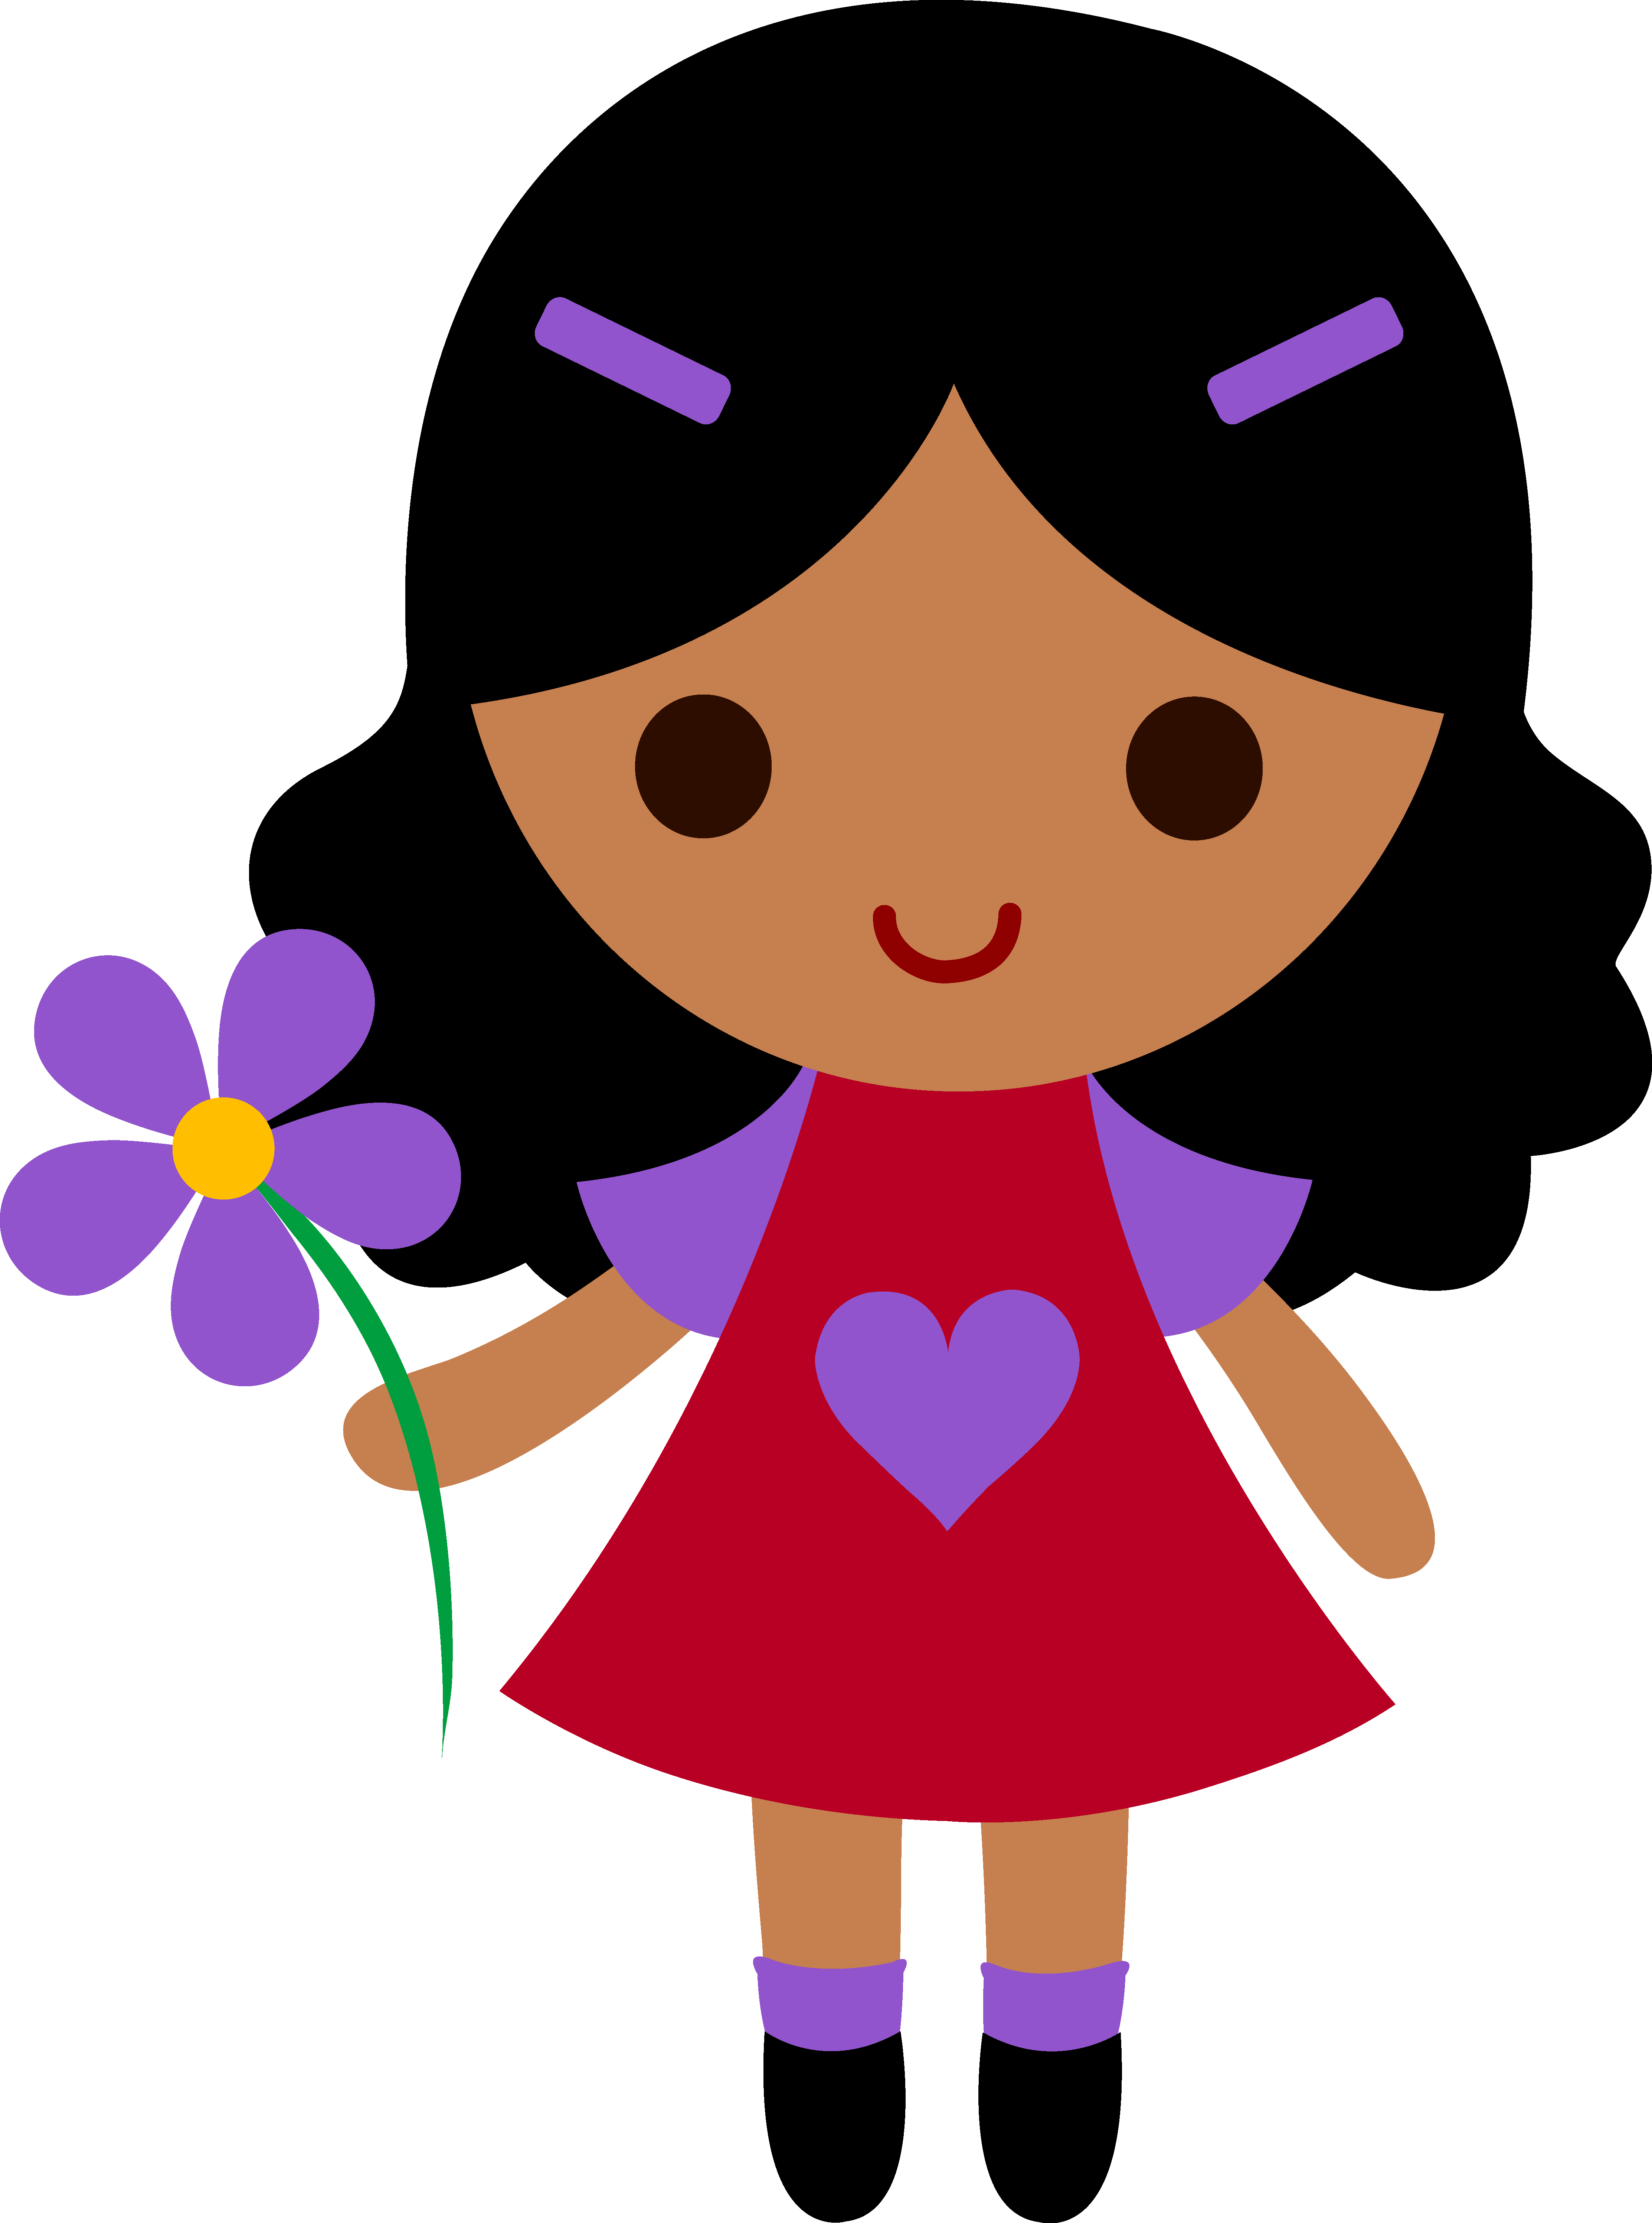 Cute Cartoon Girl Transparent Picture PNG Image